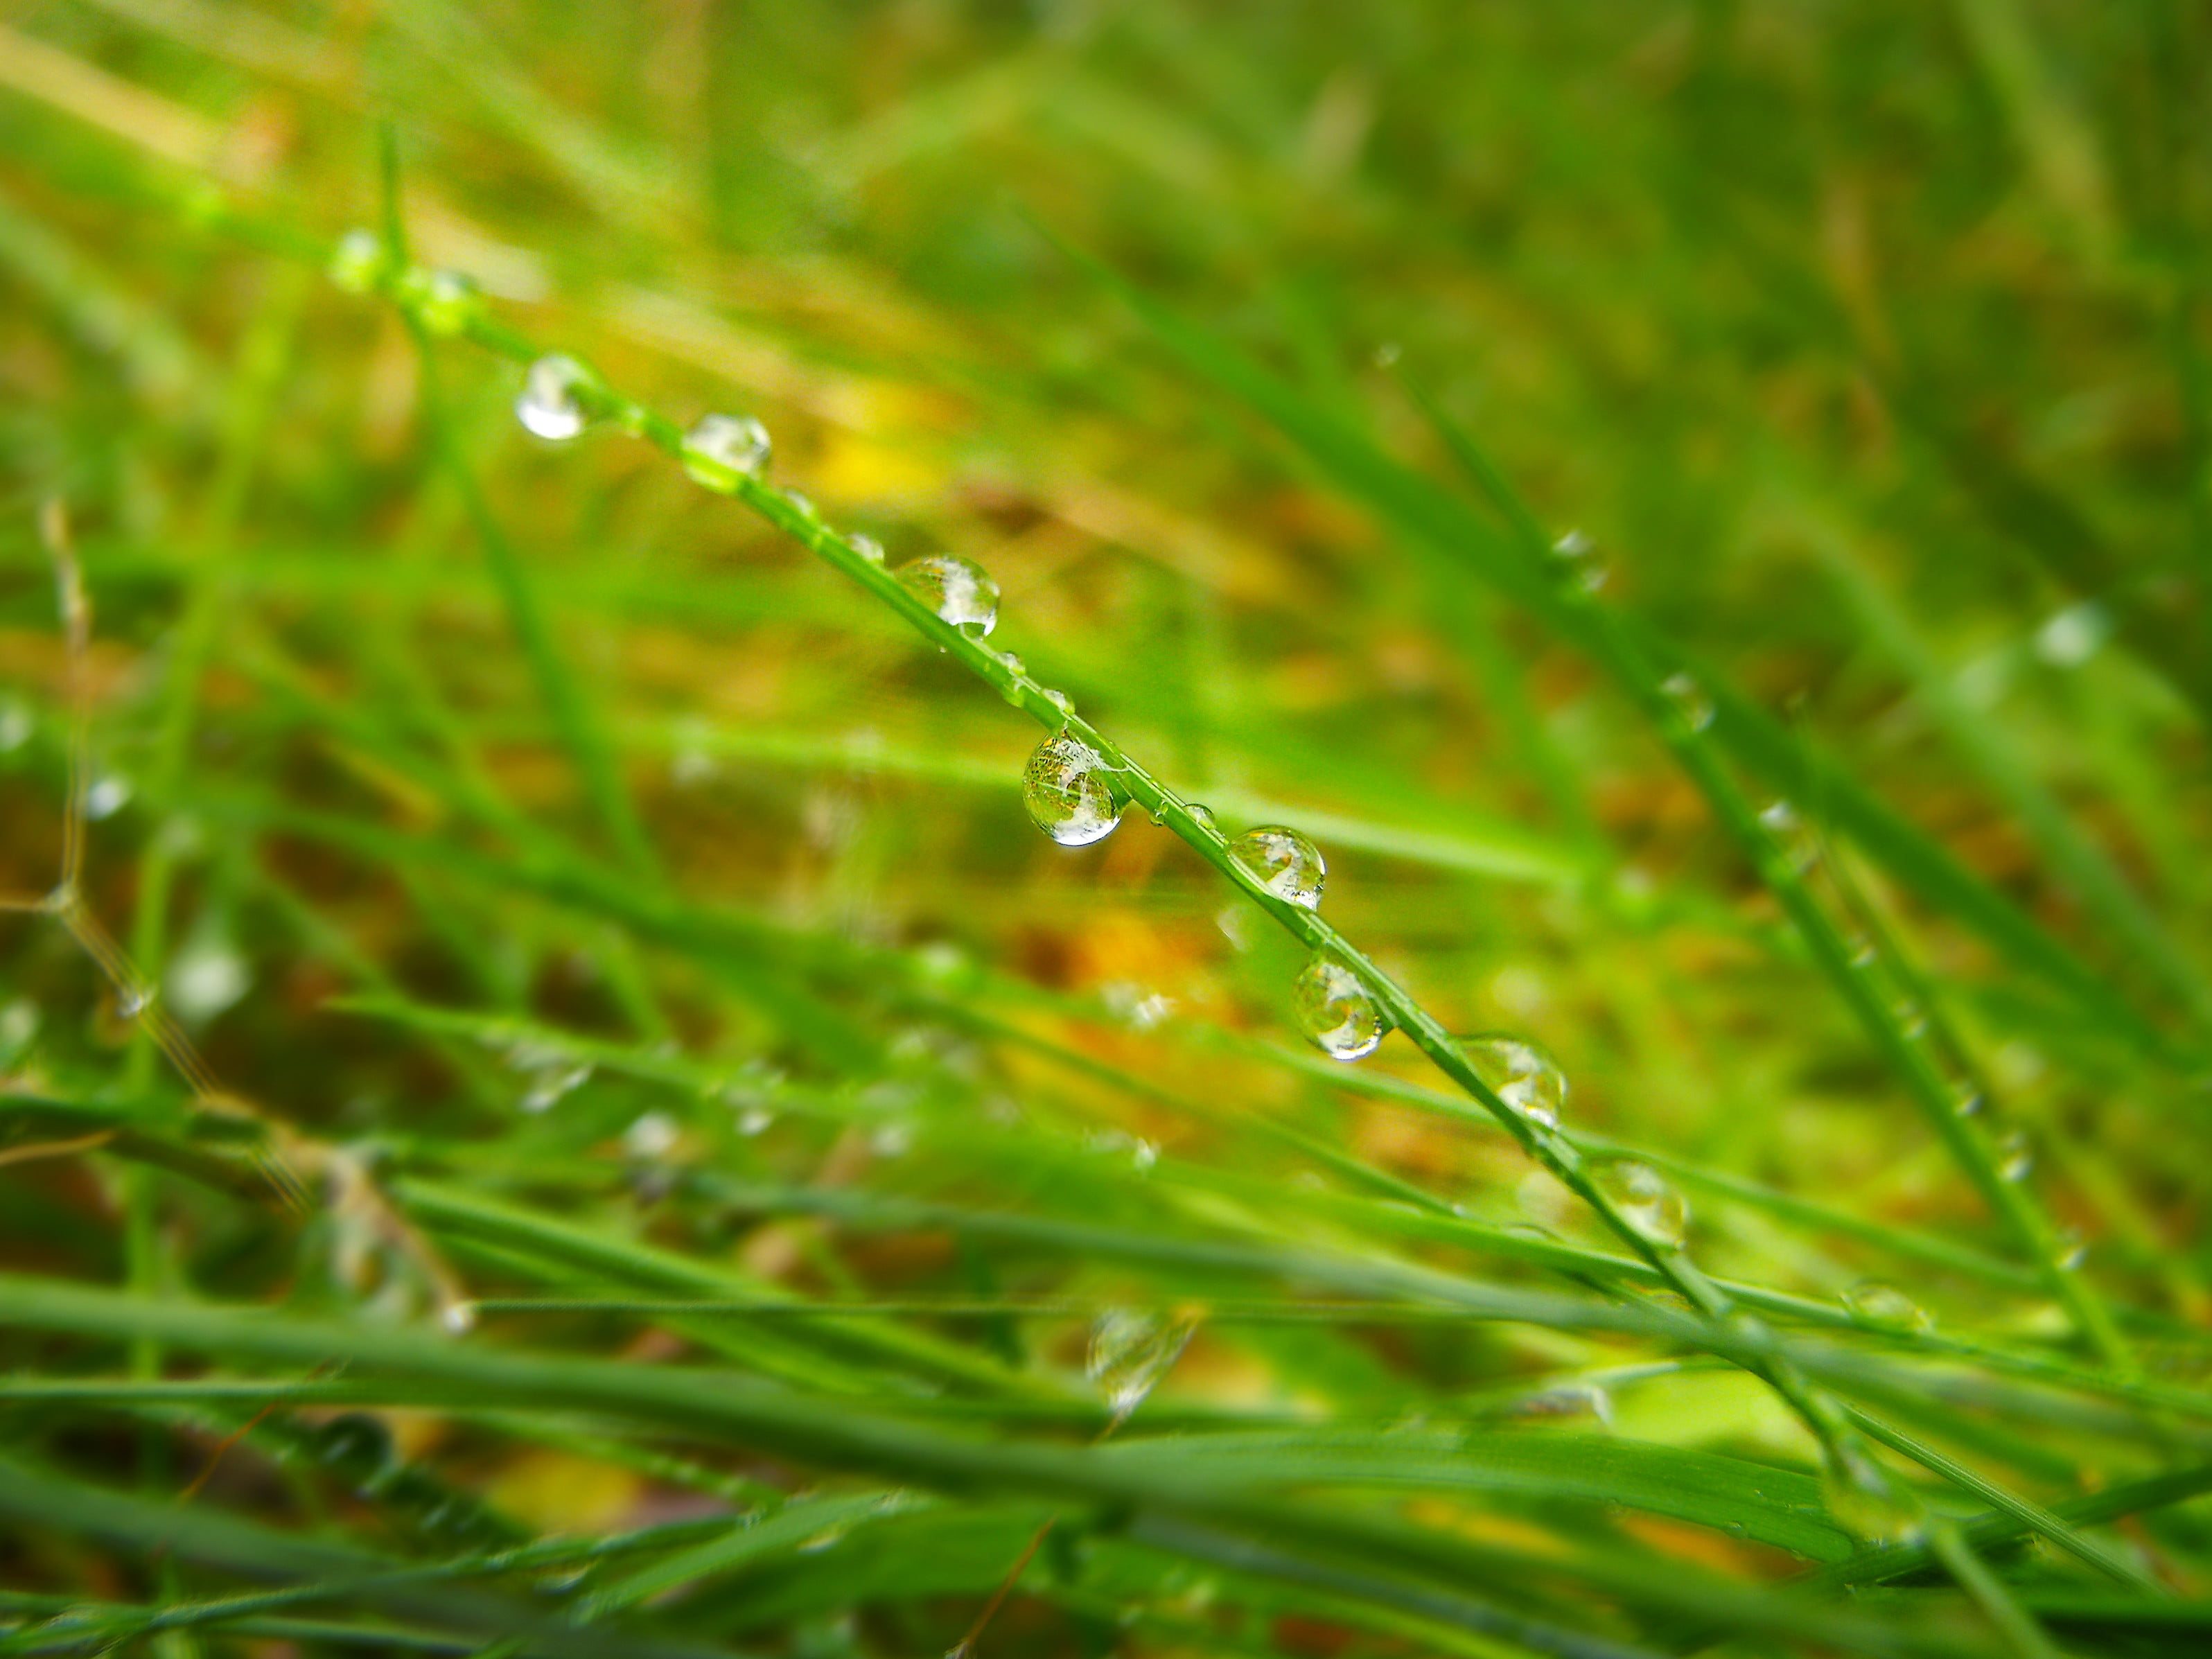 close-up photography of dew drops on green grass field